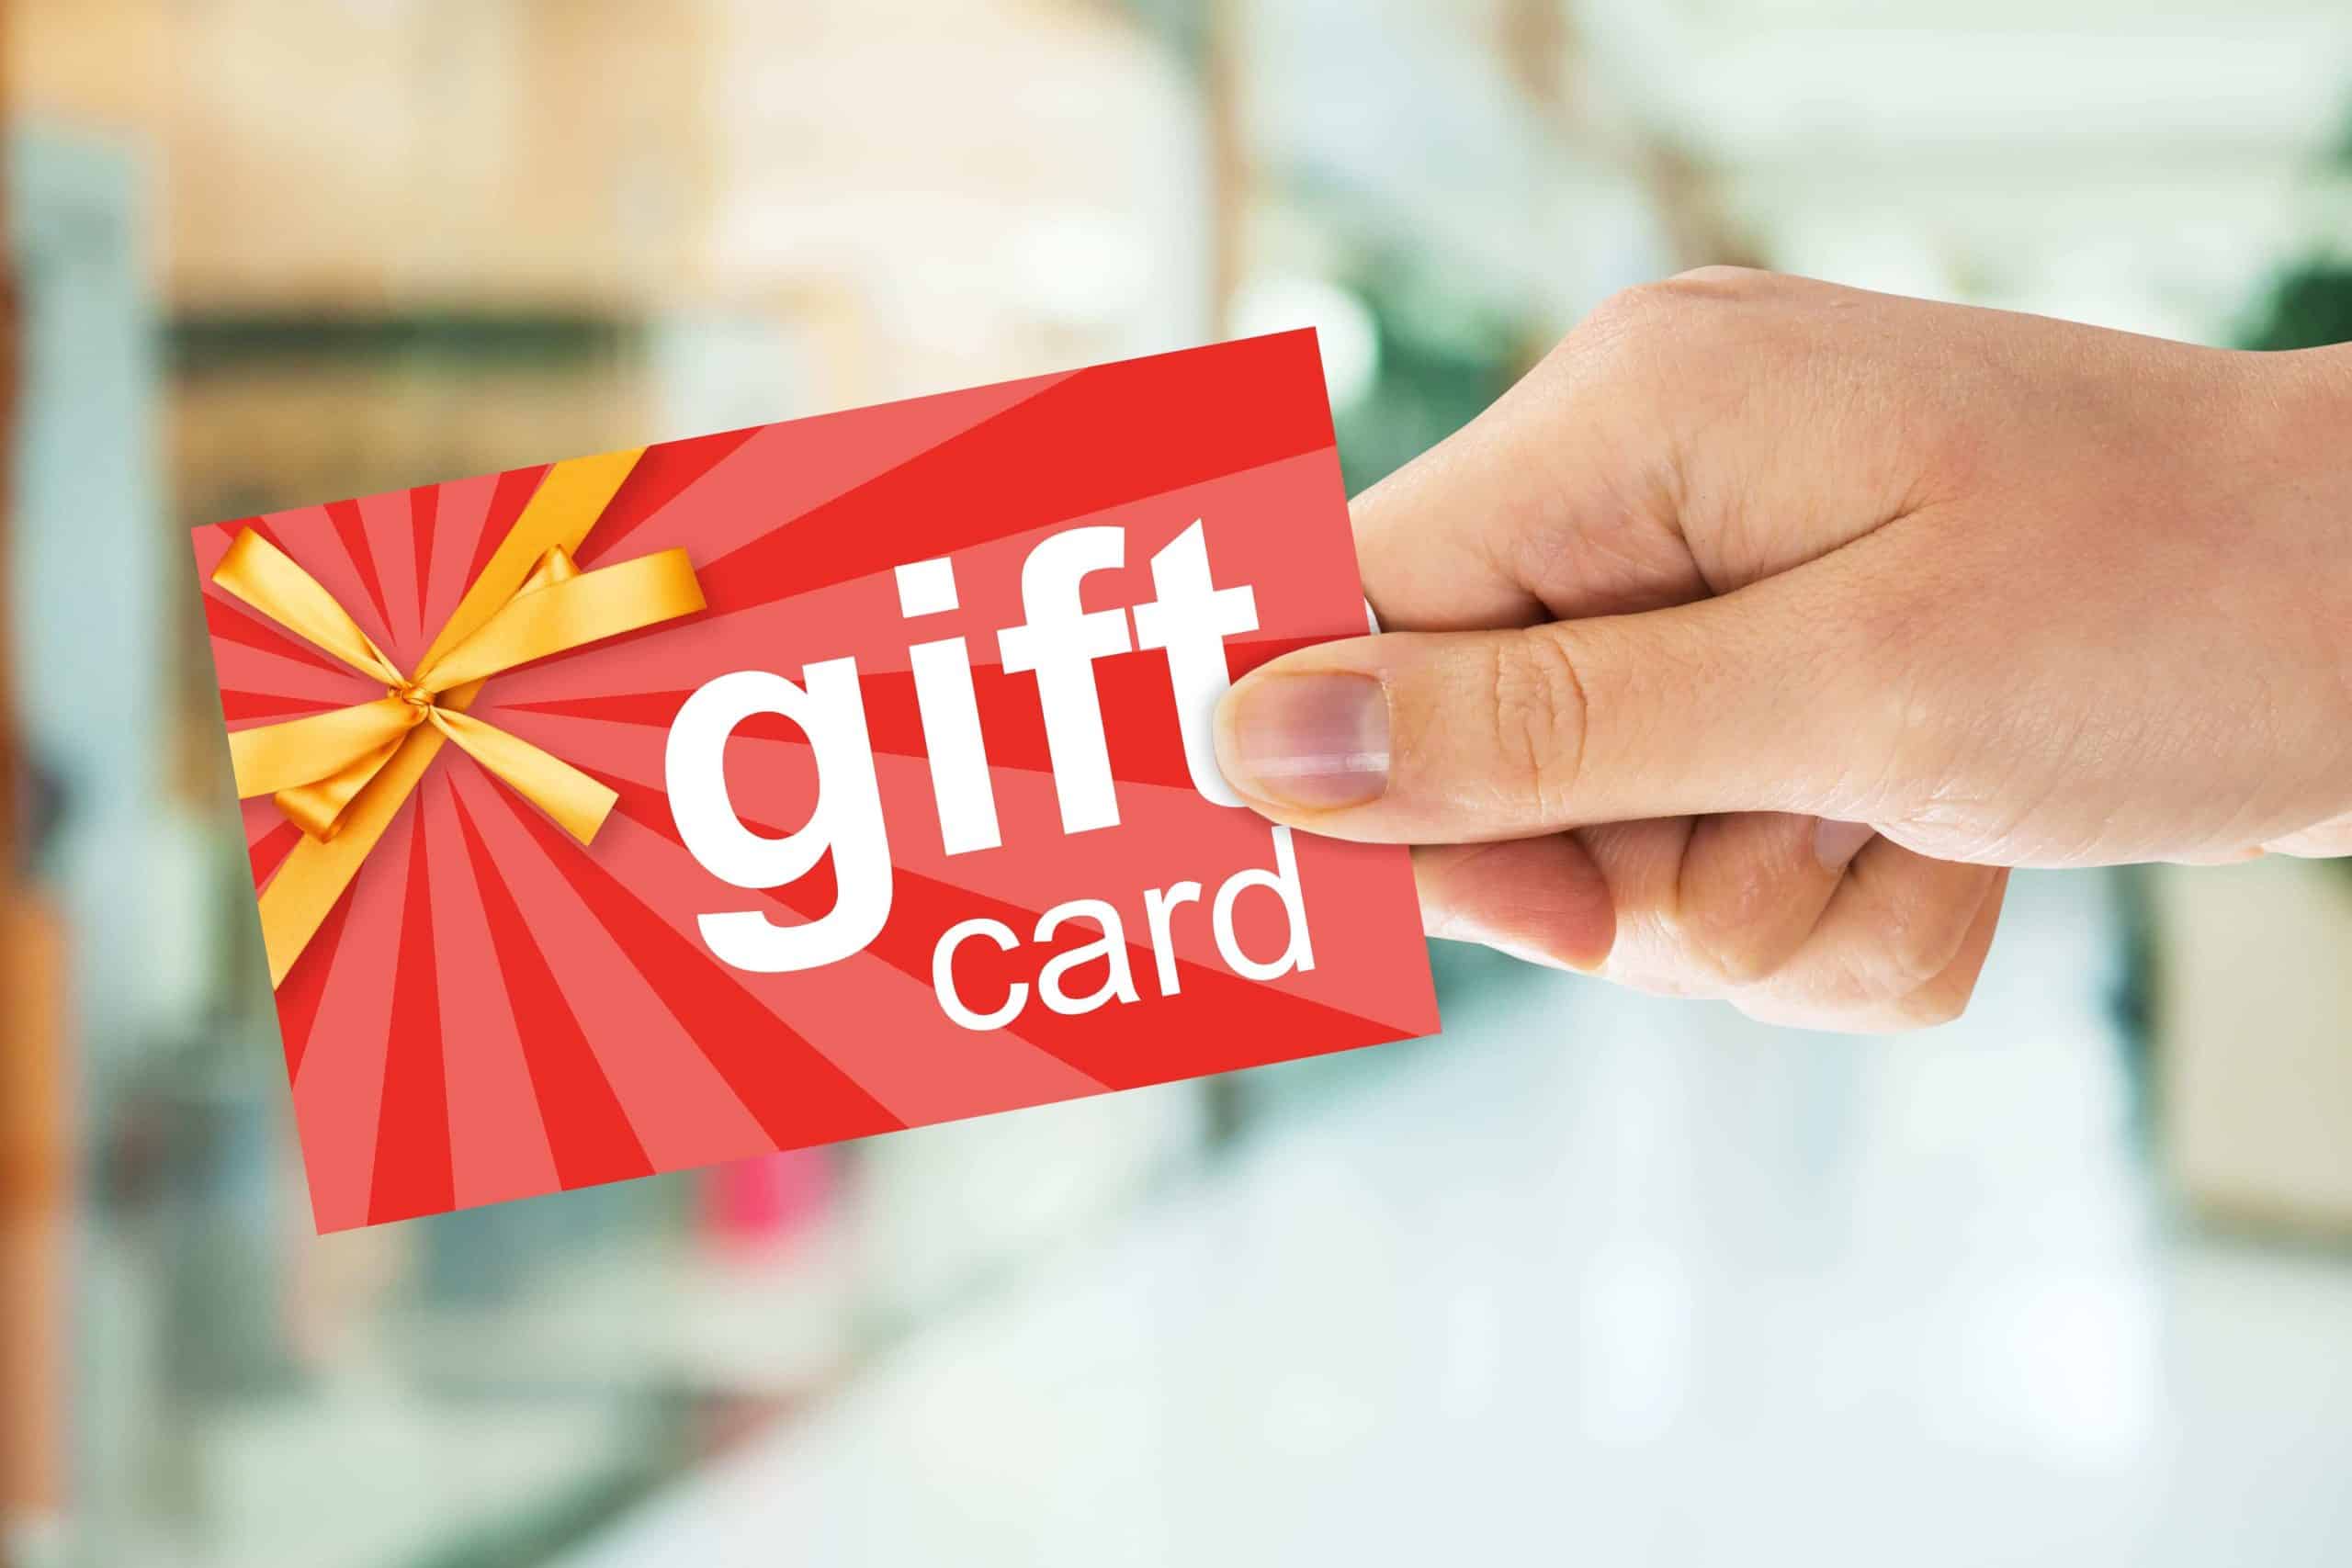 There are billions of lost dollars from lost gift cards